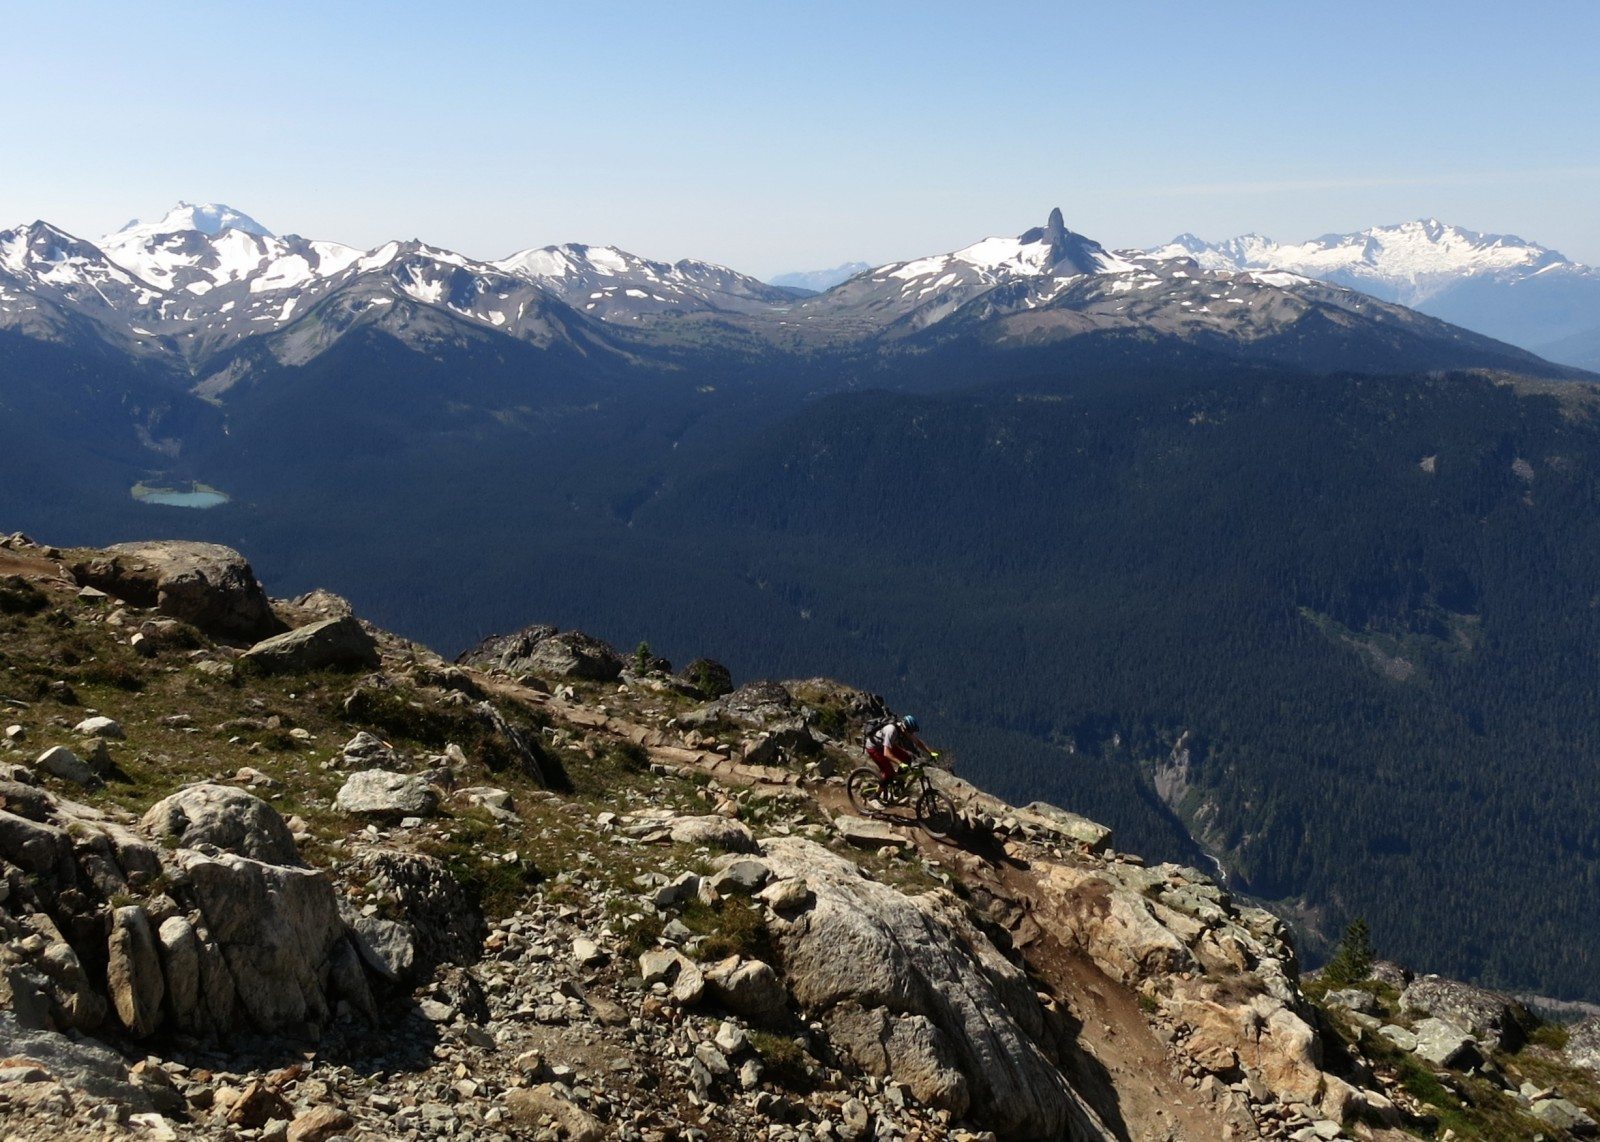 The Top of The World trail, with views of Black Tusk, at Whistler Mountain Bike Park.